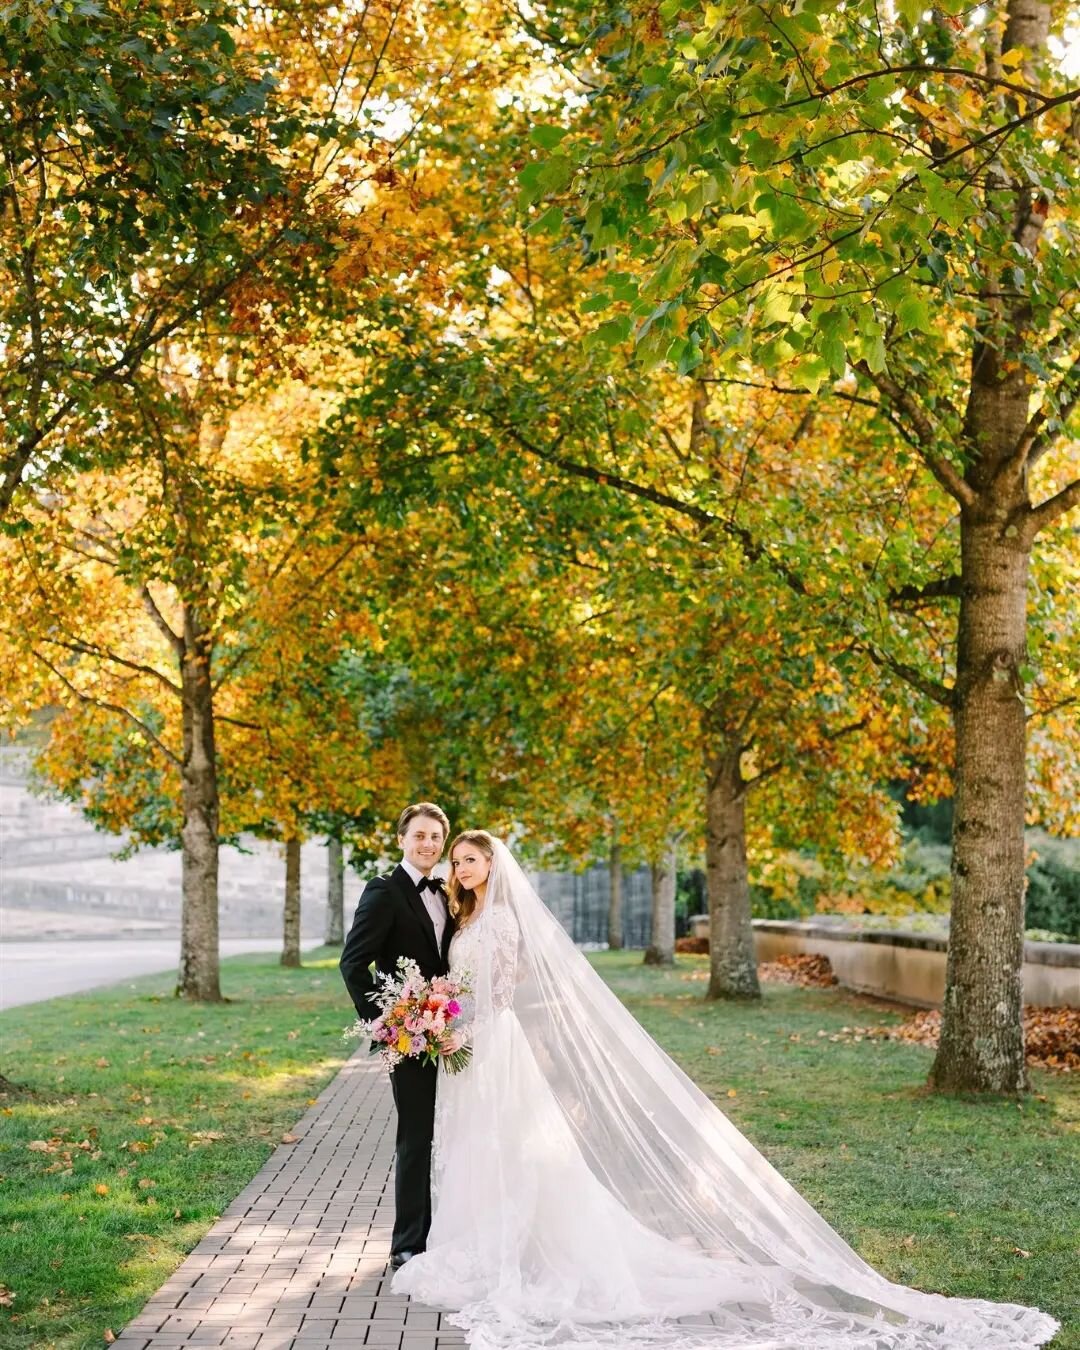 Happy Thanksgiving to all!  And  we were so thankful for the incredible Fall colors, that certainly graced Alexine &amp; Caleb's beautiful day @biltmoreweddingsnc
✨10-15-22✨
*
*
@biltmoreestate
📸 @marycostaphoto 
💐 @biltmorefloral
💄@brushesandbrai